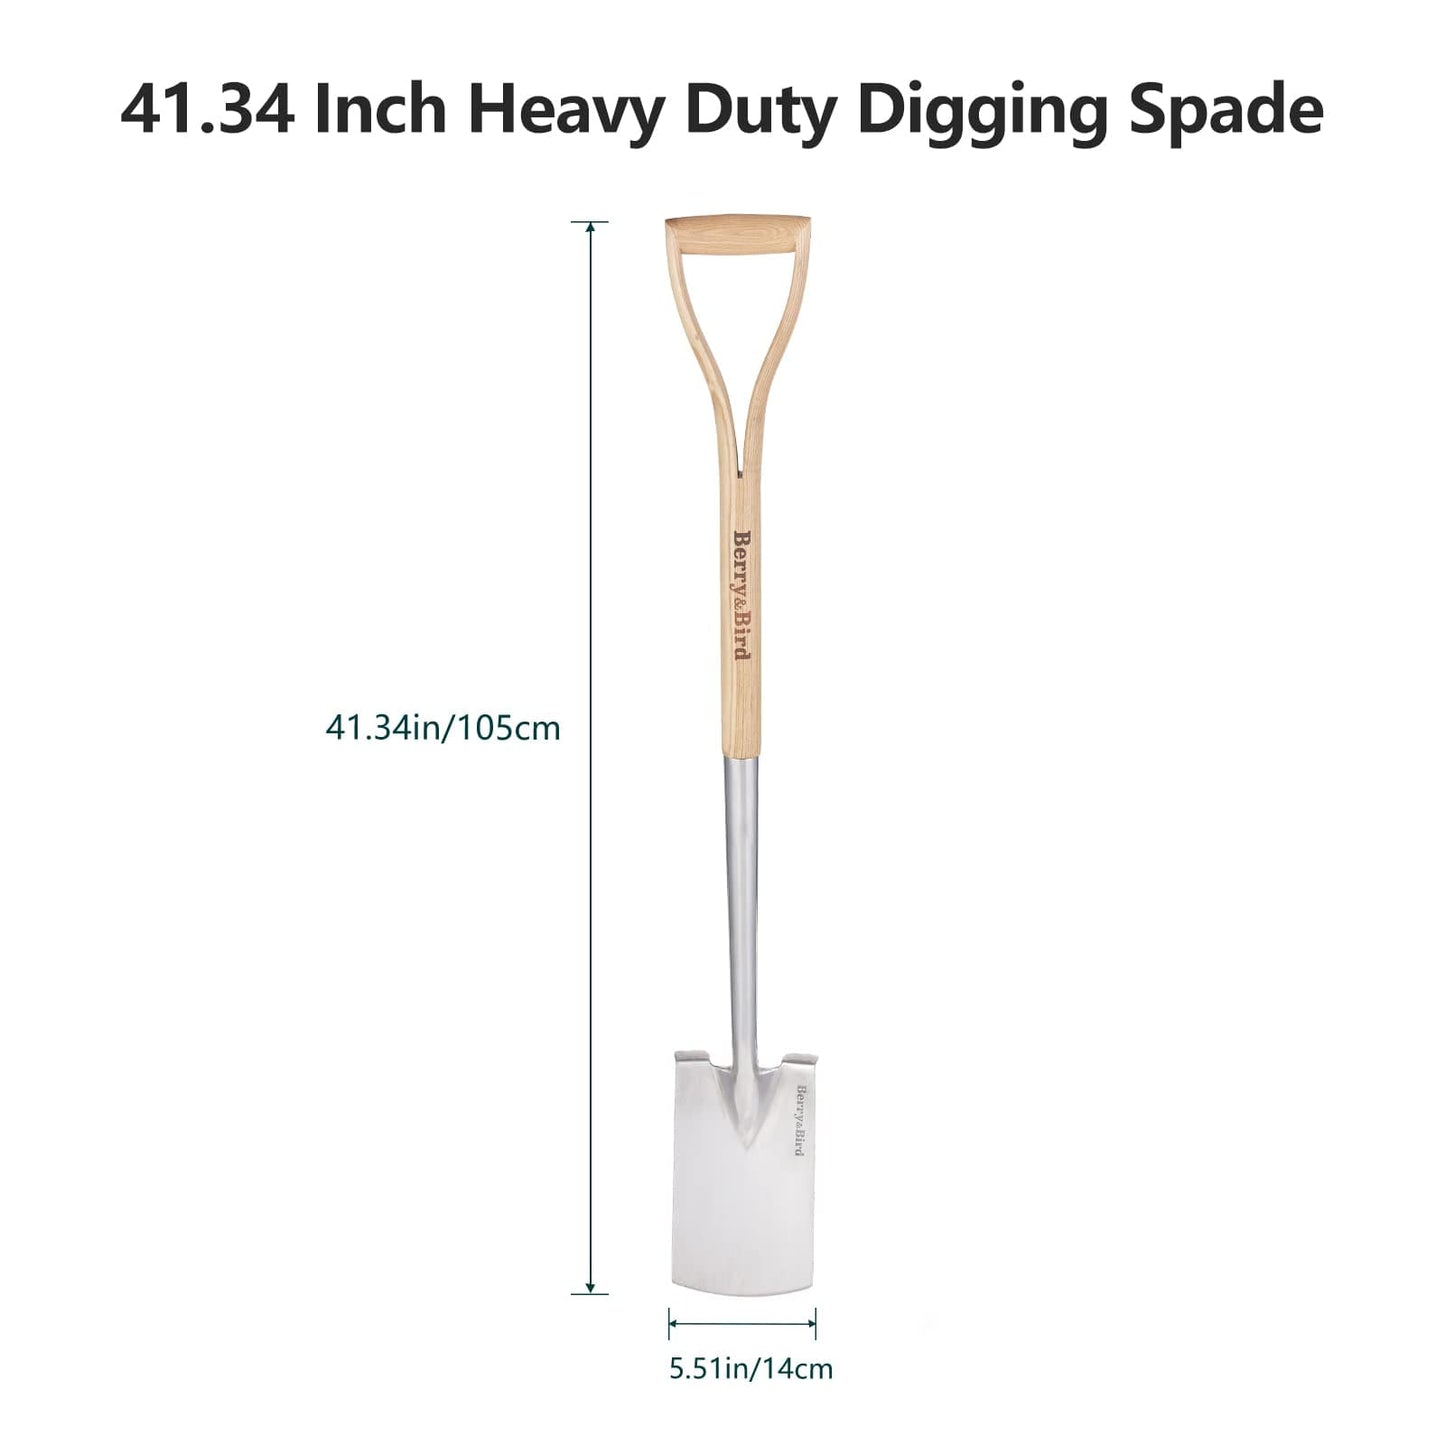 Digging Spade Gardening Square Border Spade 41.3 inch with D-Grip Handle